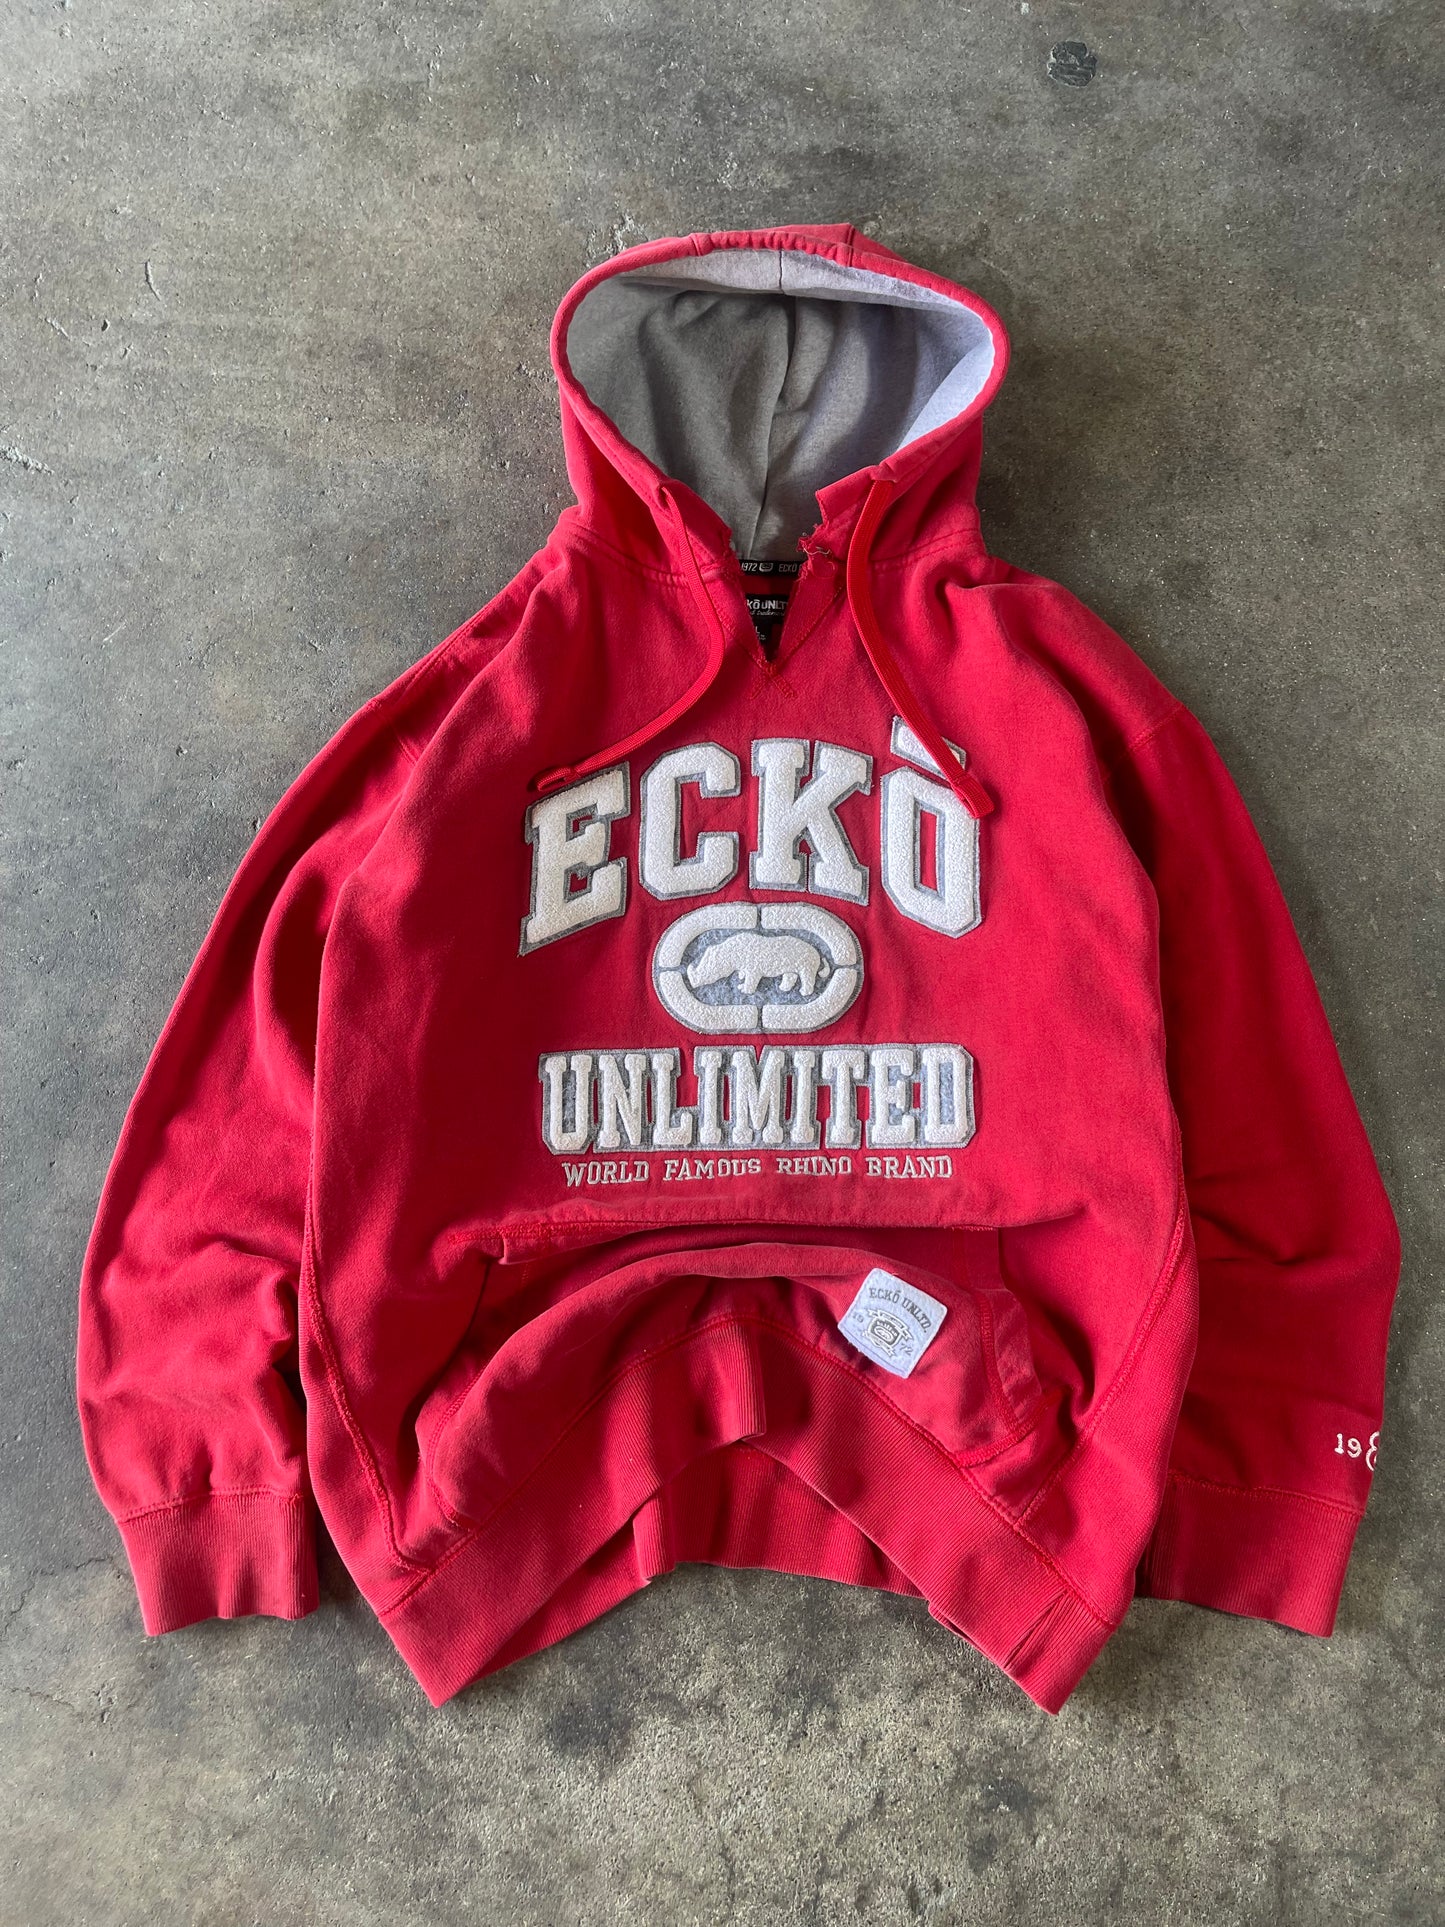 00’s Cherry Red Ecko Embroidered Hoodie Large